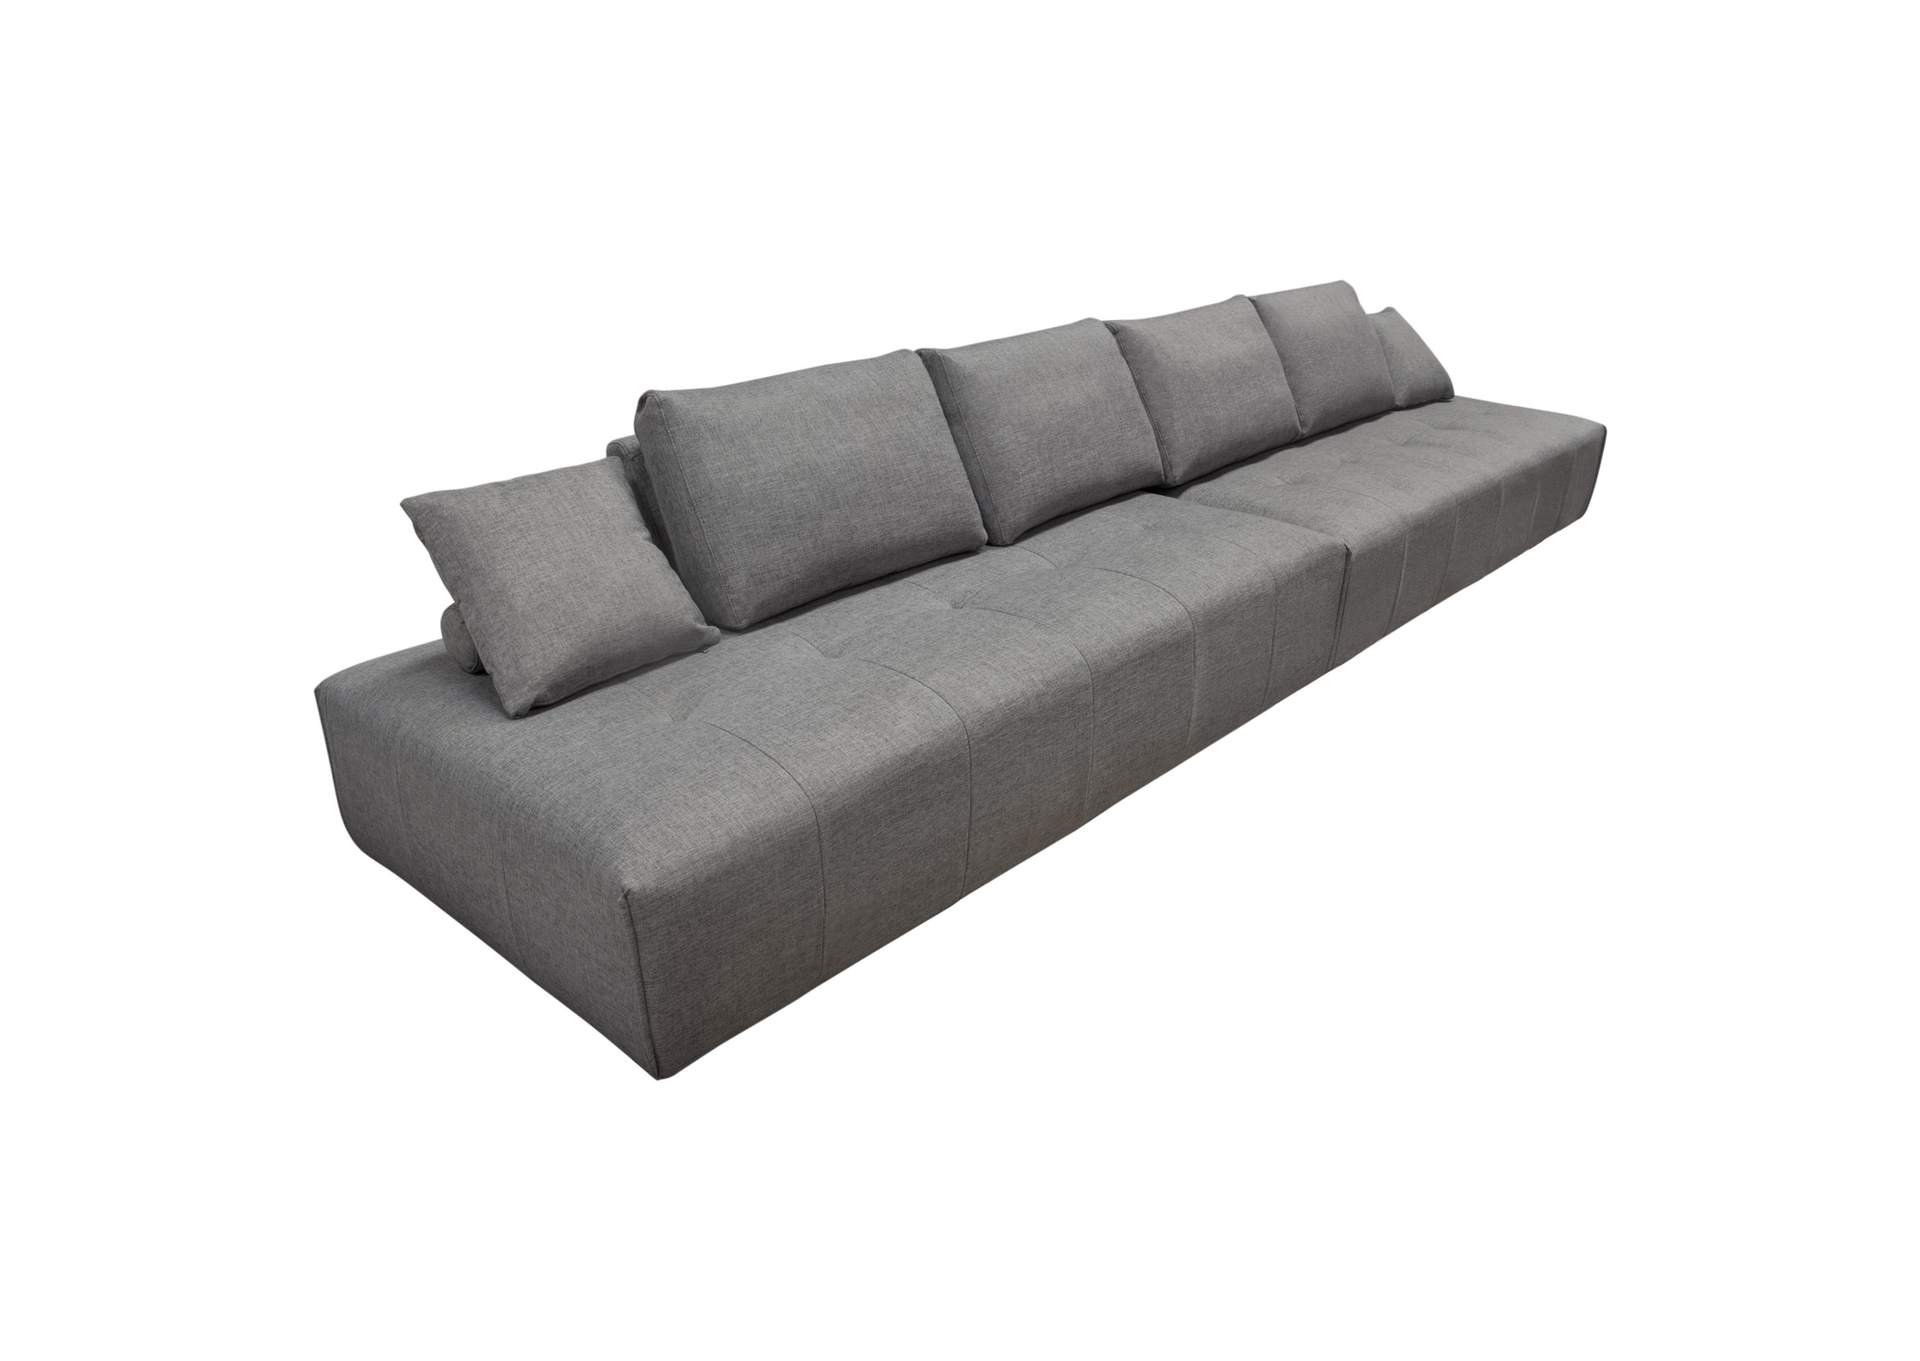 Cloud 2PC Lounge Seating Platforms with Moveable Backrest Supports in Space Grey Fabric by Diamond Sofa,Diamond Sofa